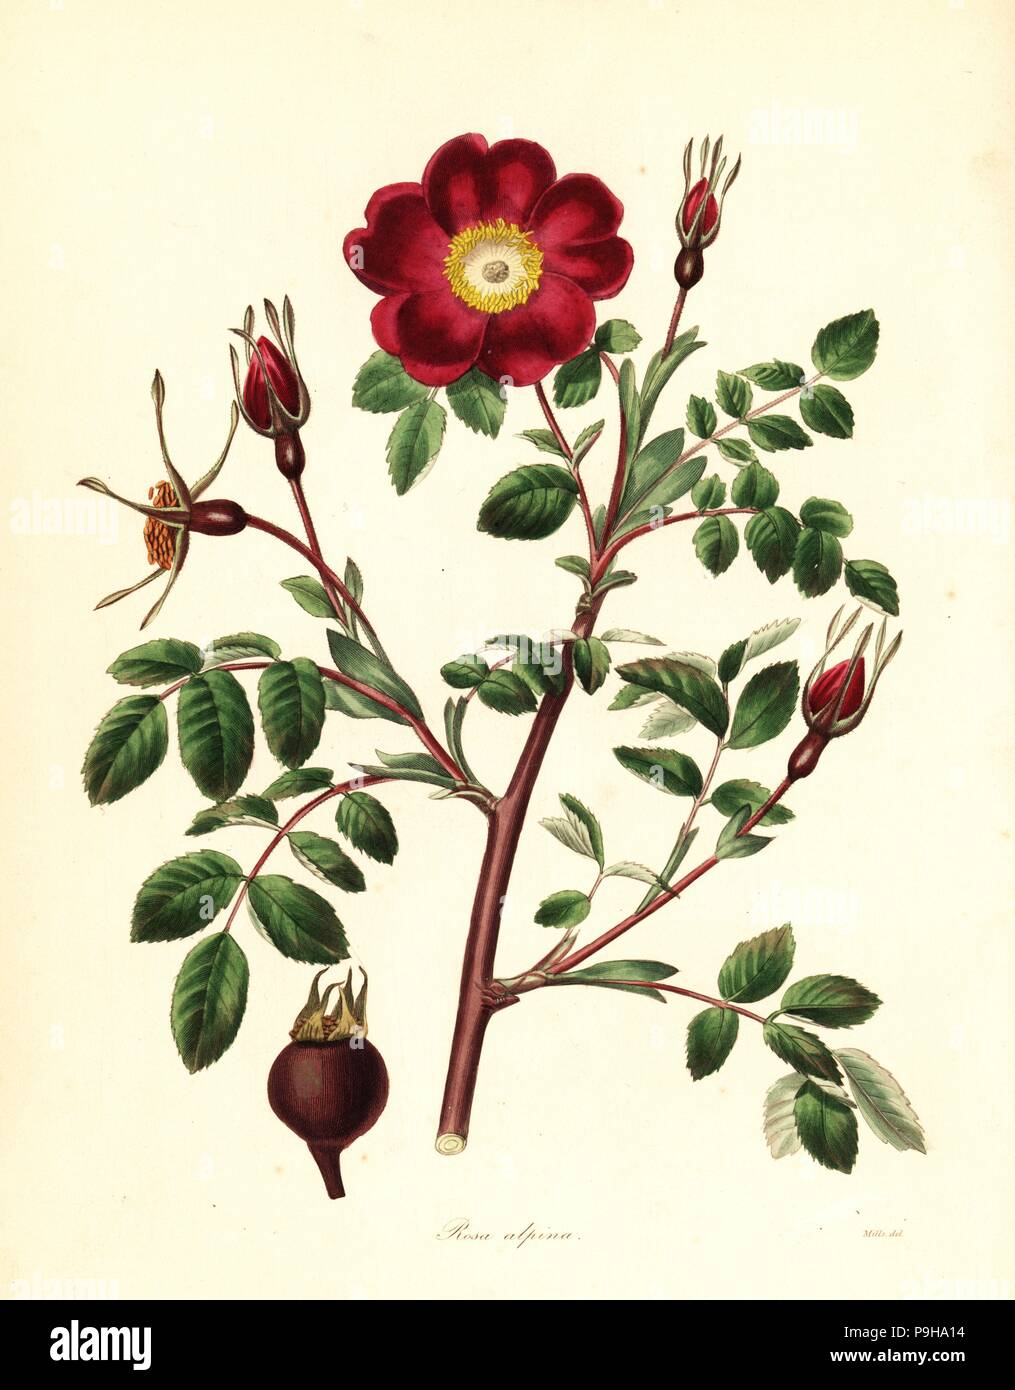 Alpine rose, Rosa pendulina (rose of Sharon, Rosa alpina). Handcoloured copperplate engraving after a botanical illustration by Mills from Benjamin Maund and the Rev. John Stevens Henslow's The Botanist, London, 1836. Stock Photo